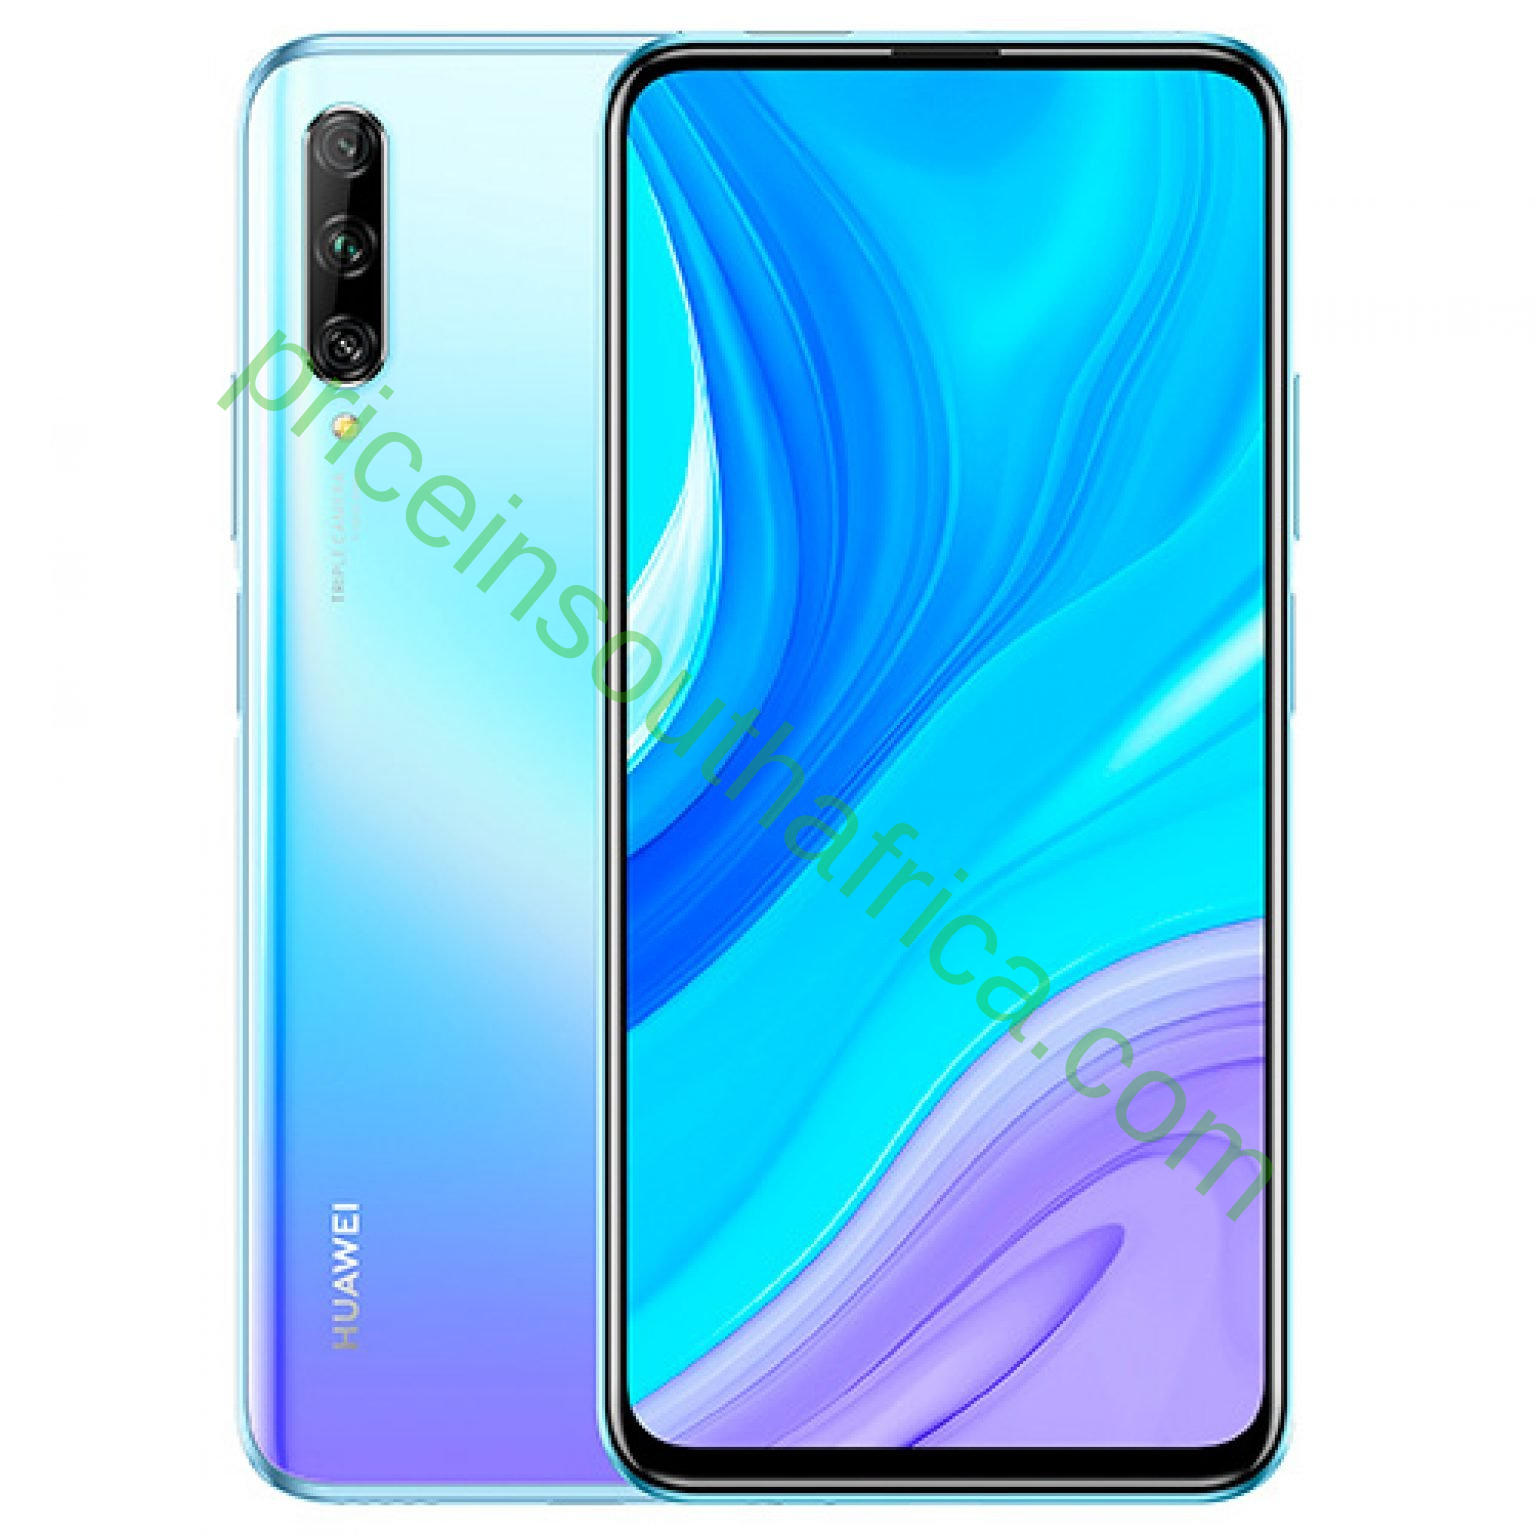 Huawei P Smart Pro 2019 Price in South Africa